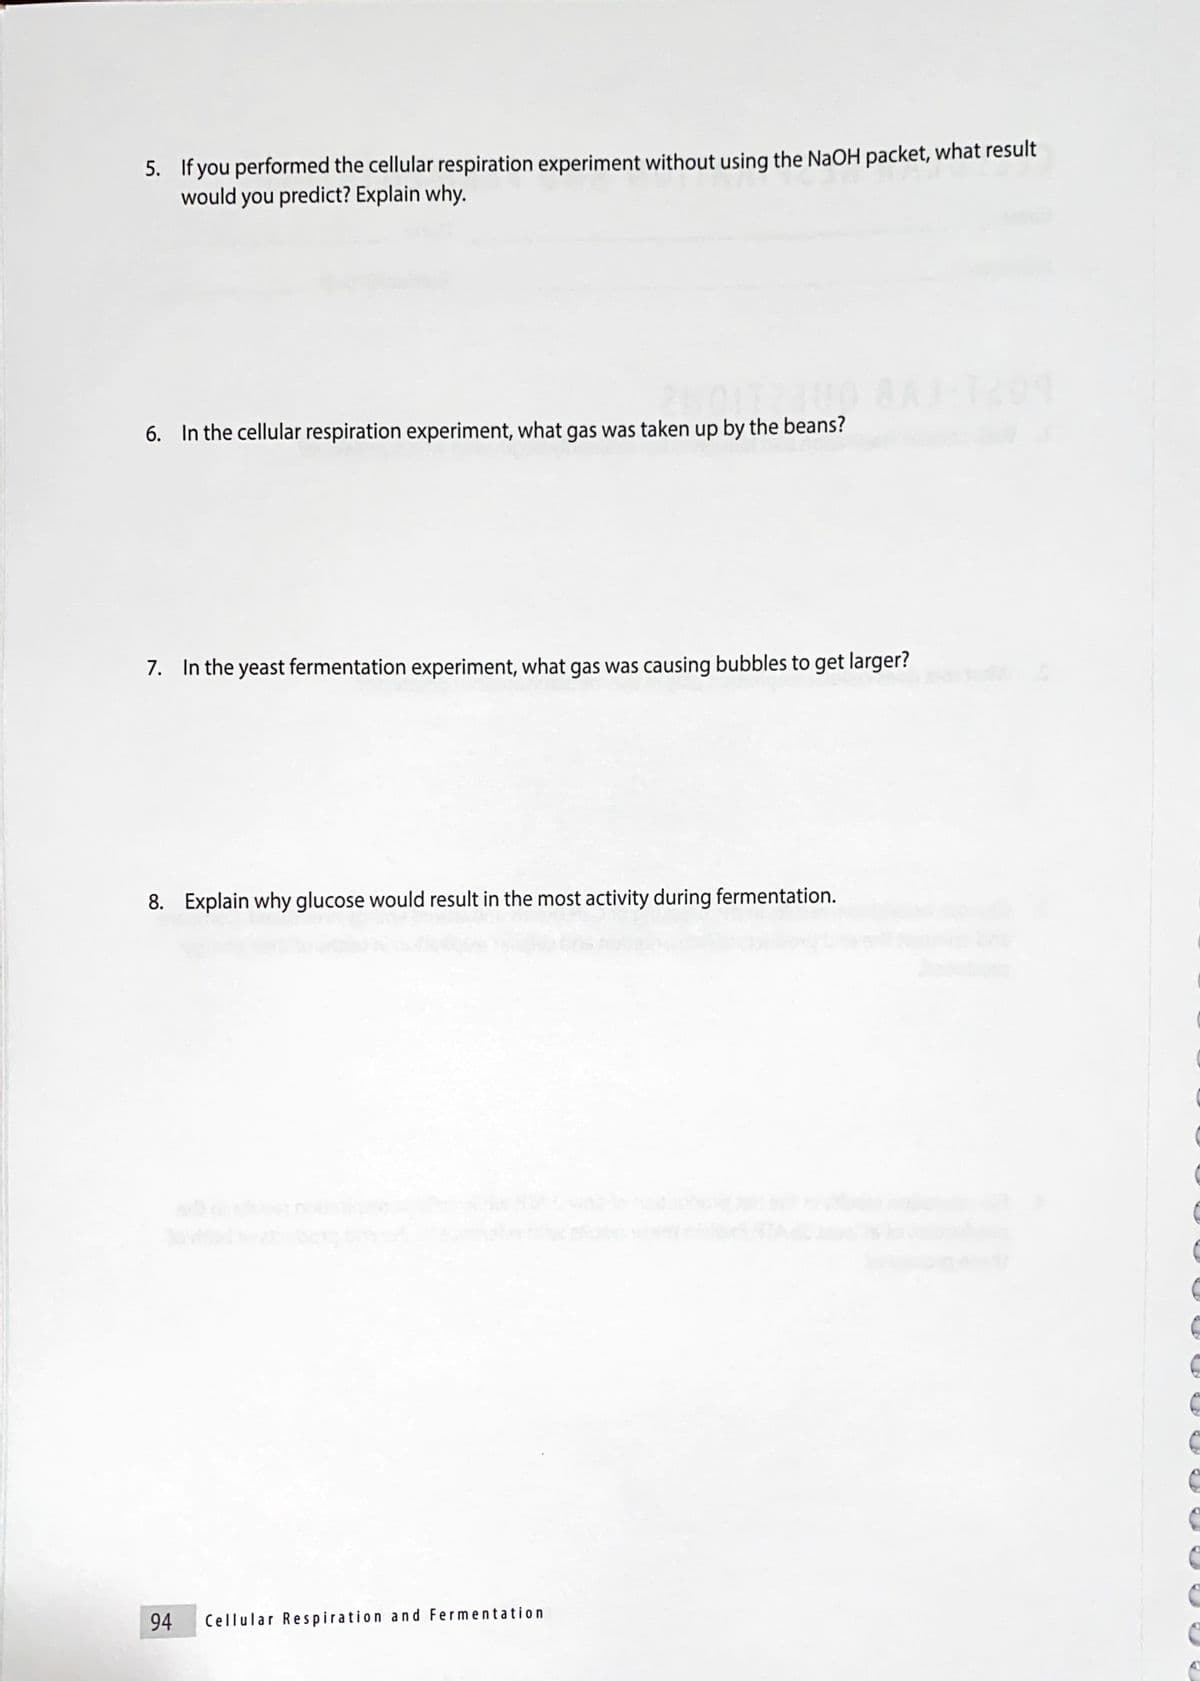 5. If you performed the cellular respiration experiment without using the NaOH packet, what result
would you predict? Explain why.
6. In the cellular respiration experiment, what gas was taken up by the beans?
7. In the yeast fermentation experiment, what gas was causing bubbles to get larger?
8. Explain why glucose would result in the most activity during fermentation.
94
Cellular Respiration and Fermentation
